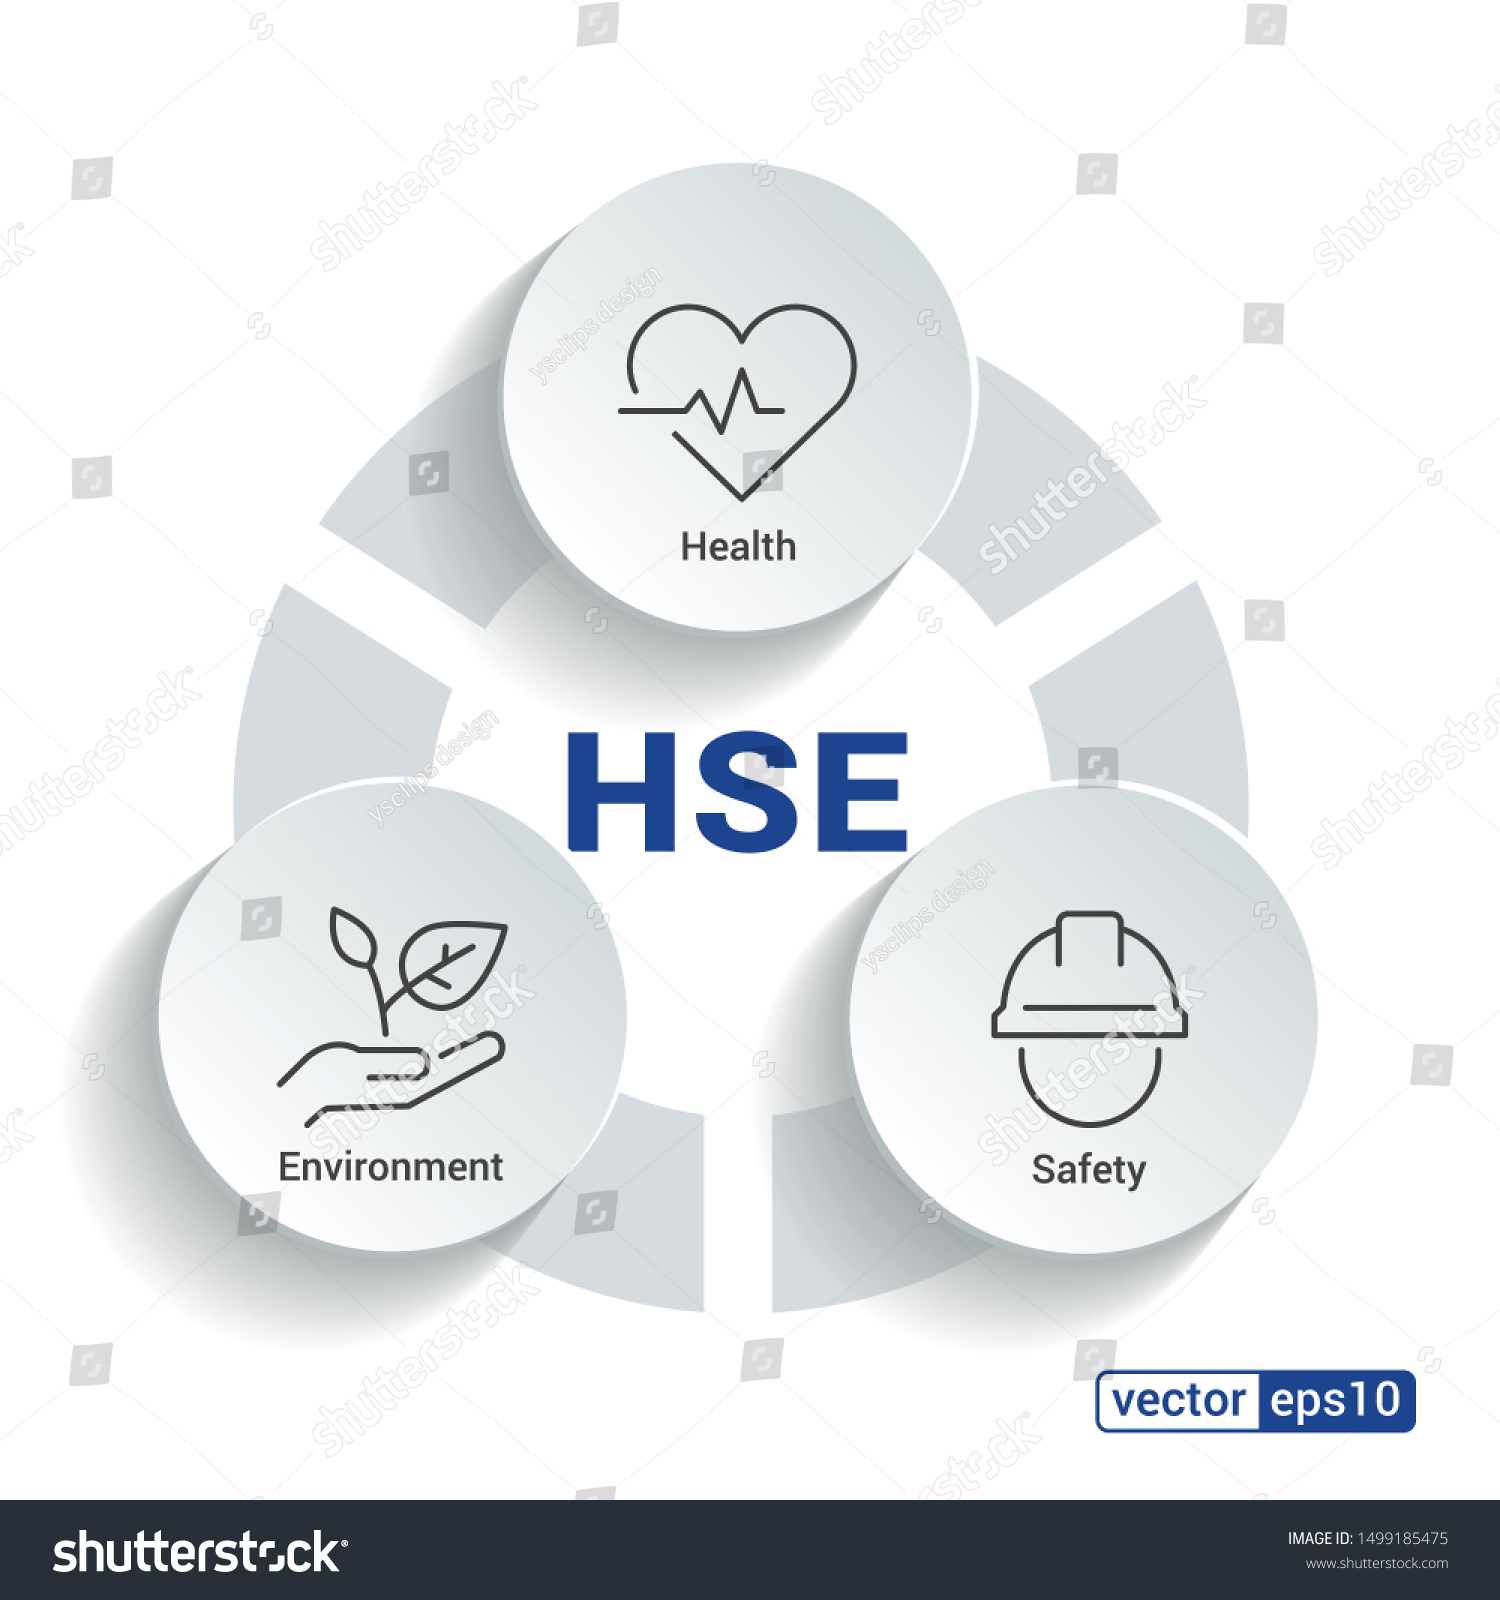 hse-safety-images-stock-photos-vectors-shutterstock